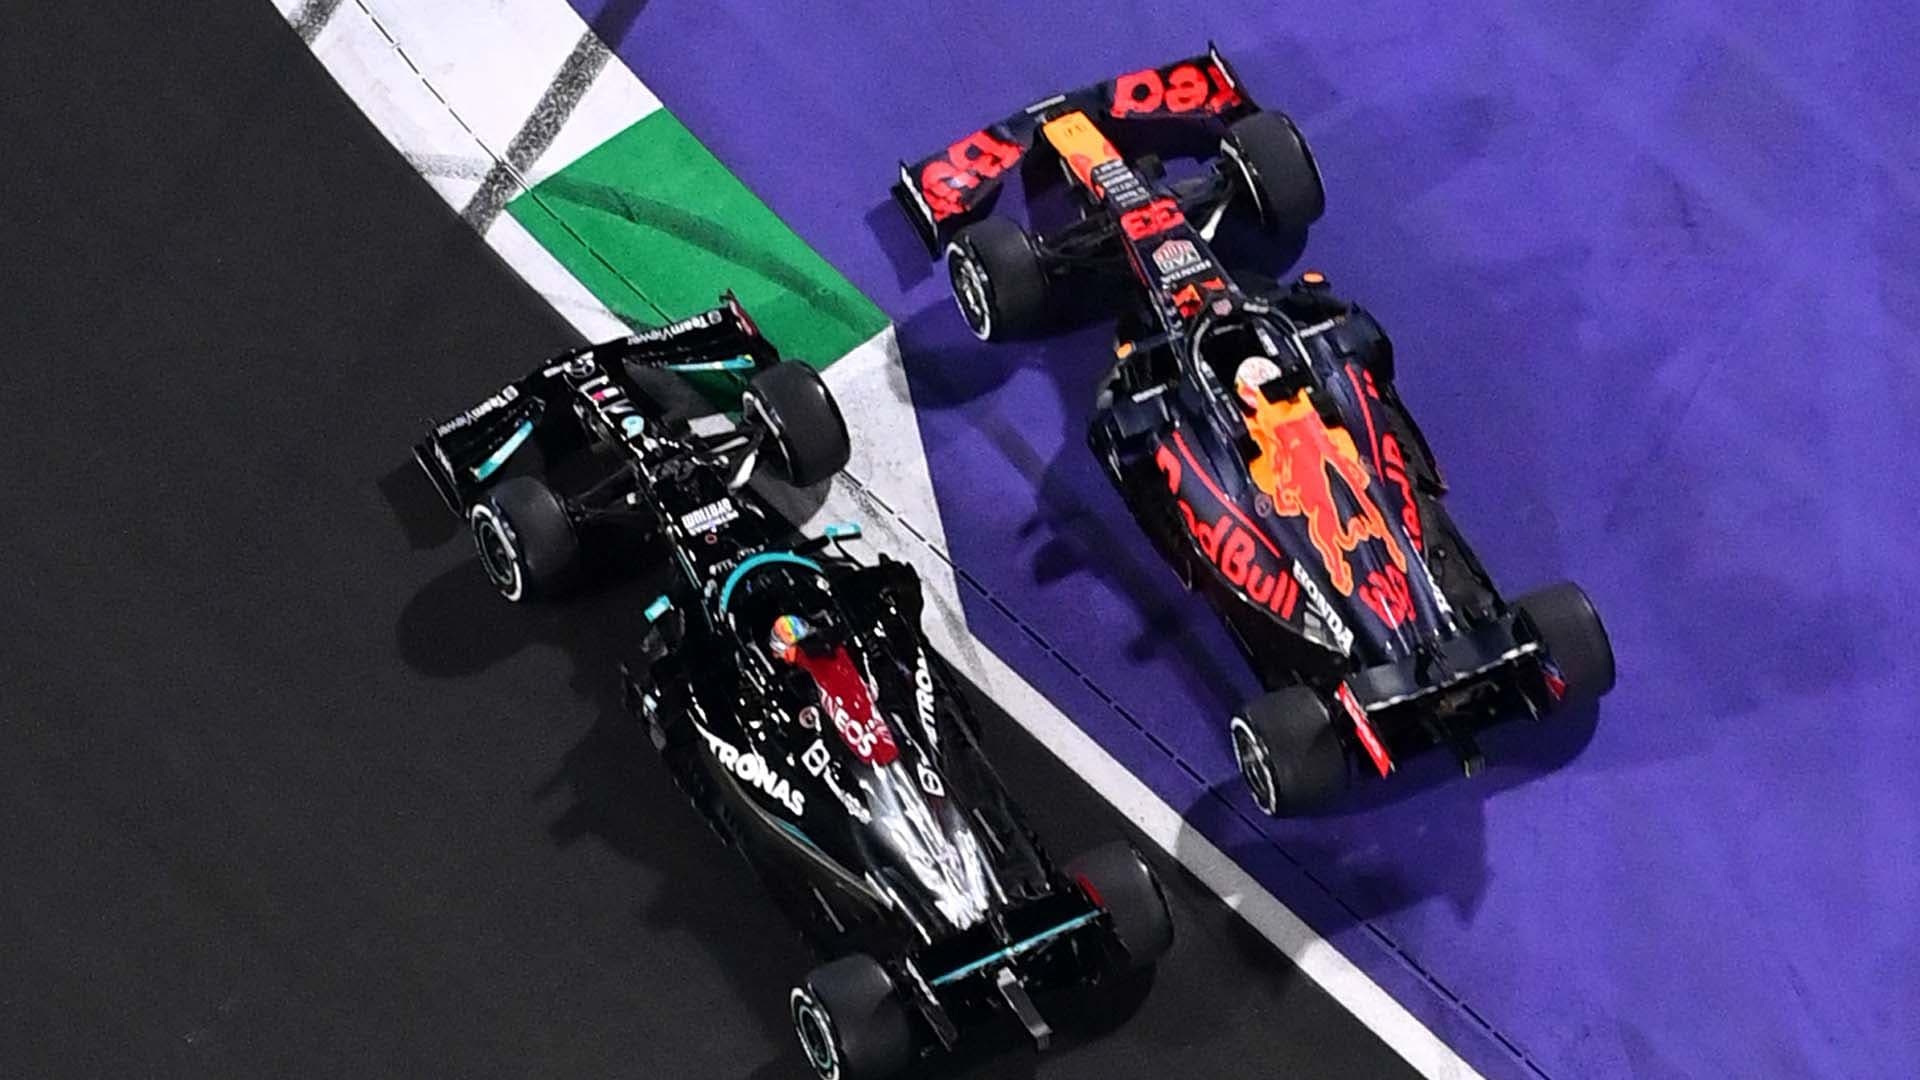 How F1’s Polarizing Title Fight Became a Tie With One Race to Go